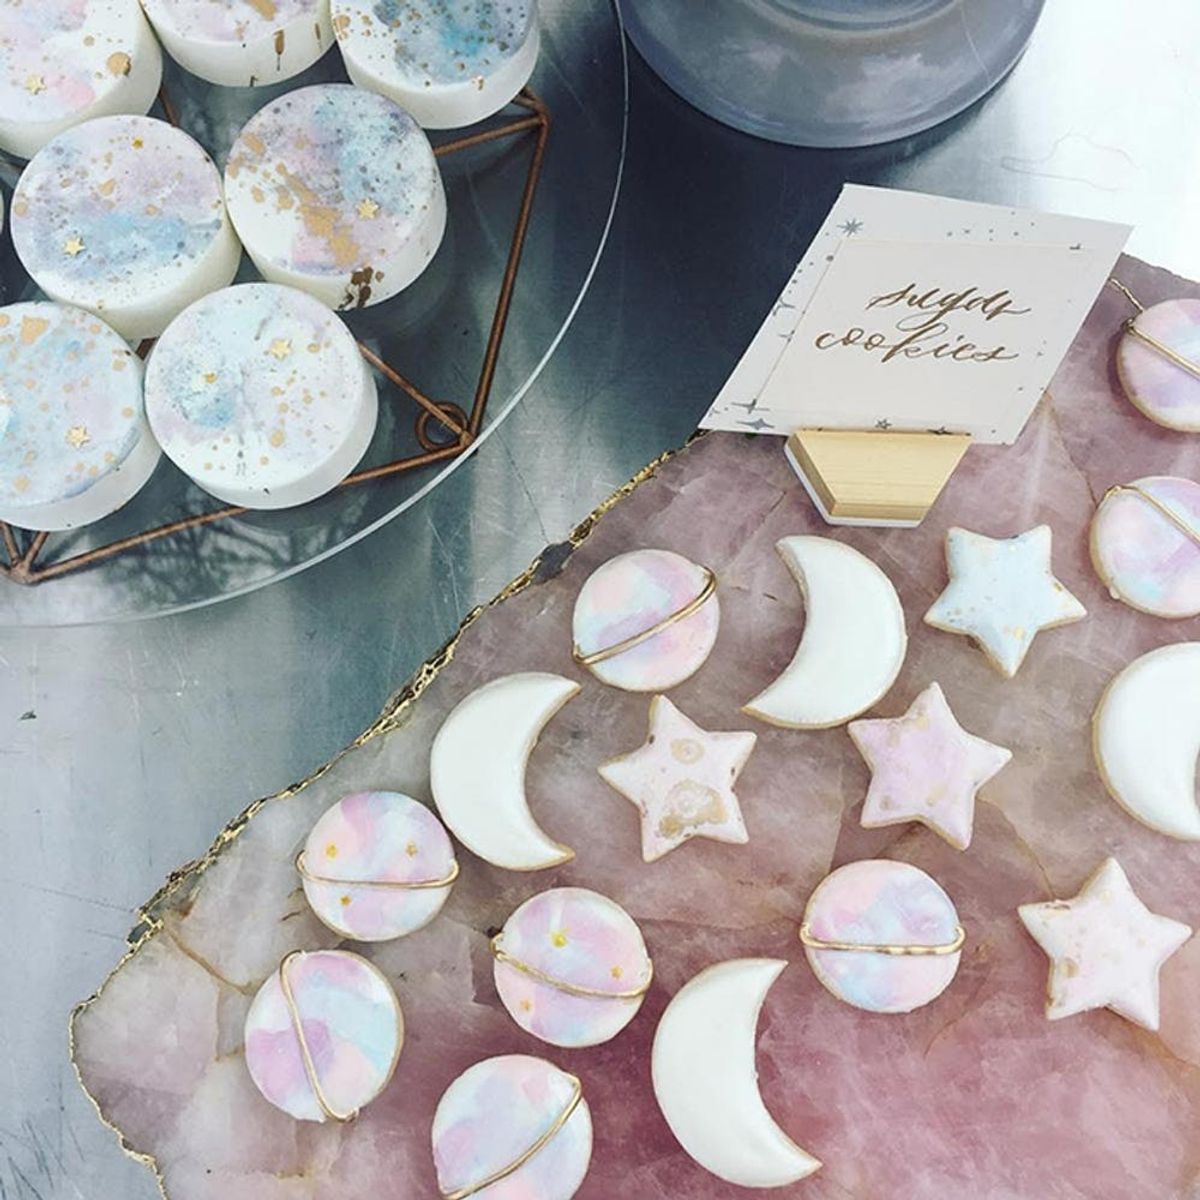 10 Celestial Bridal Shower Details That Are Out of This World